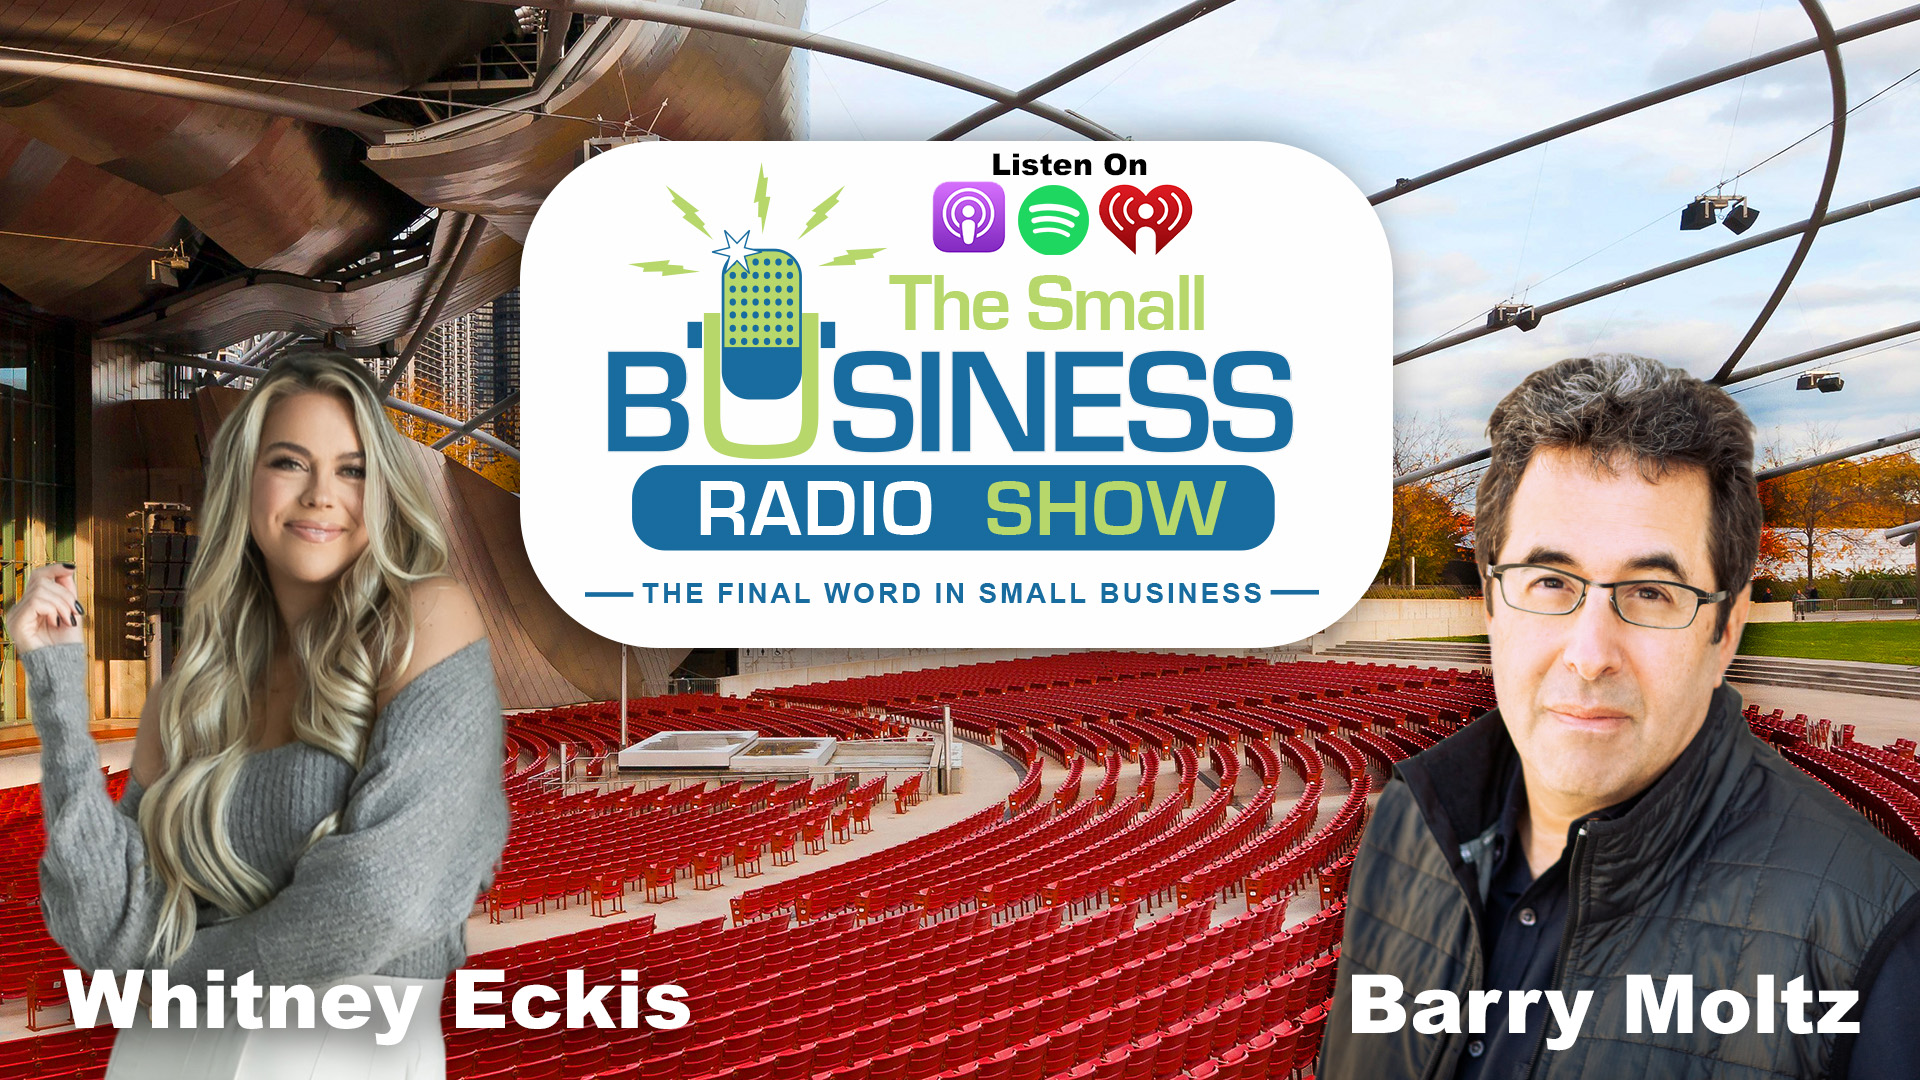 Whitney Eckis on The Small Business Radio Show